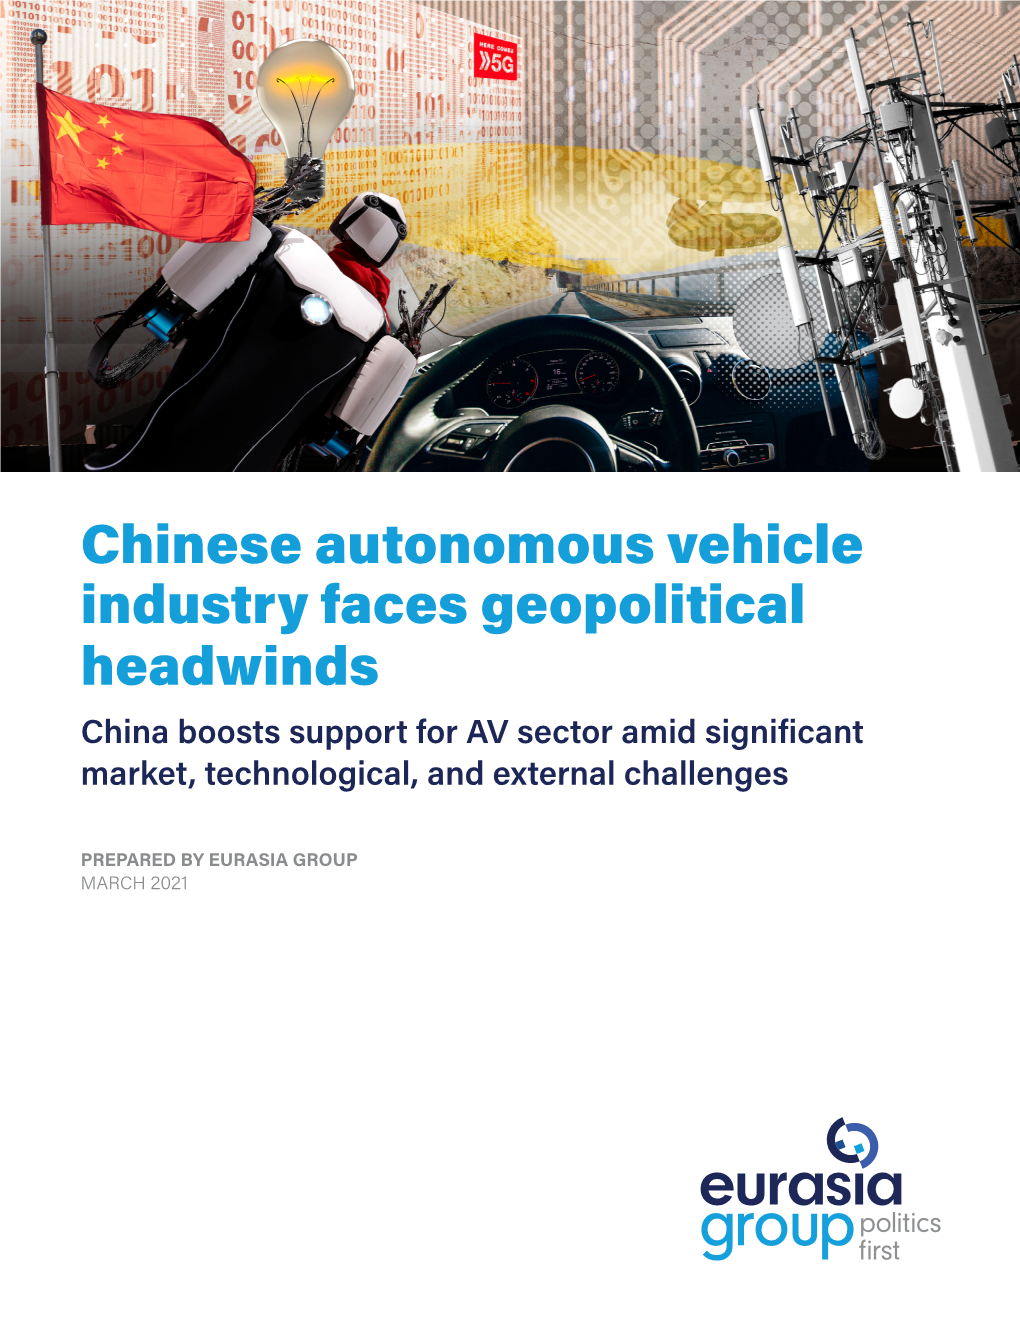 Chinese Autonomous Vehicle Industry Faces Geopolitical Headwinds China Boosts Support for AV Sector Amid Significant Market, Technological, and External Challenges